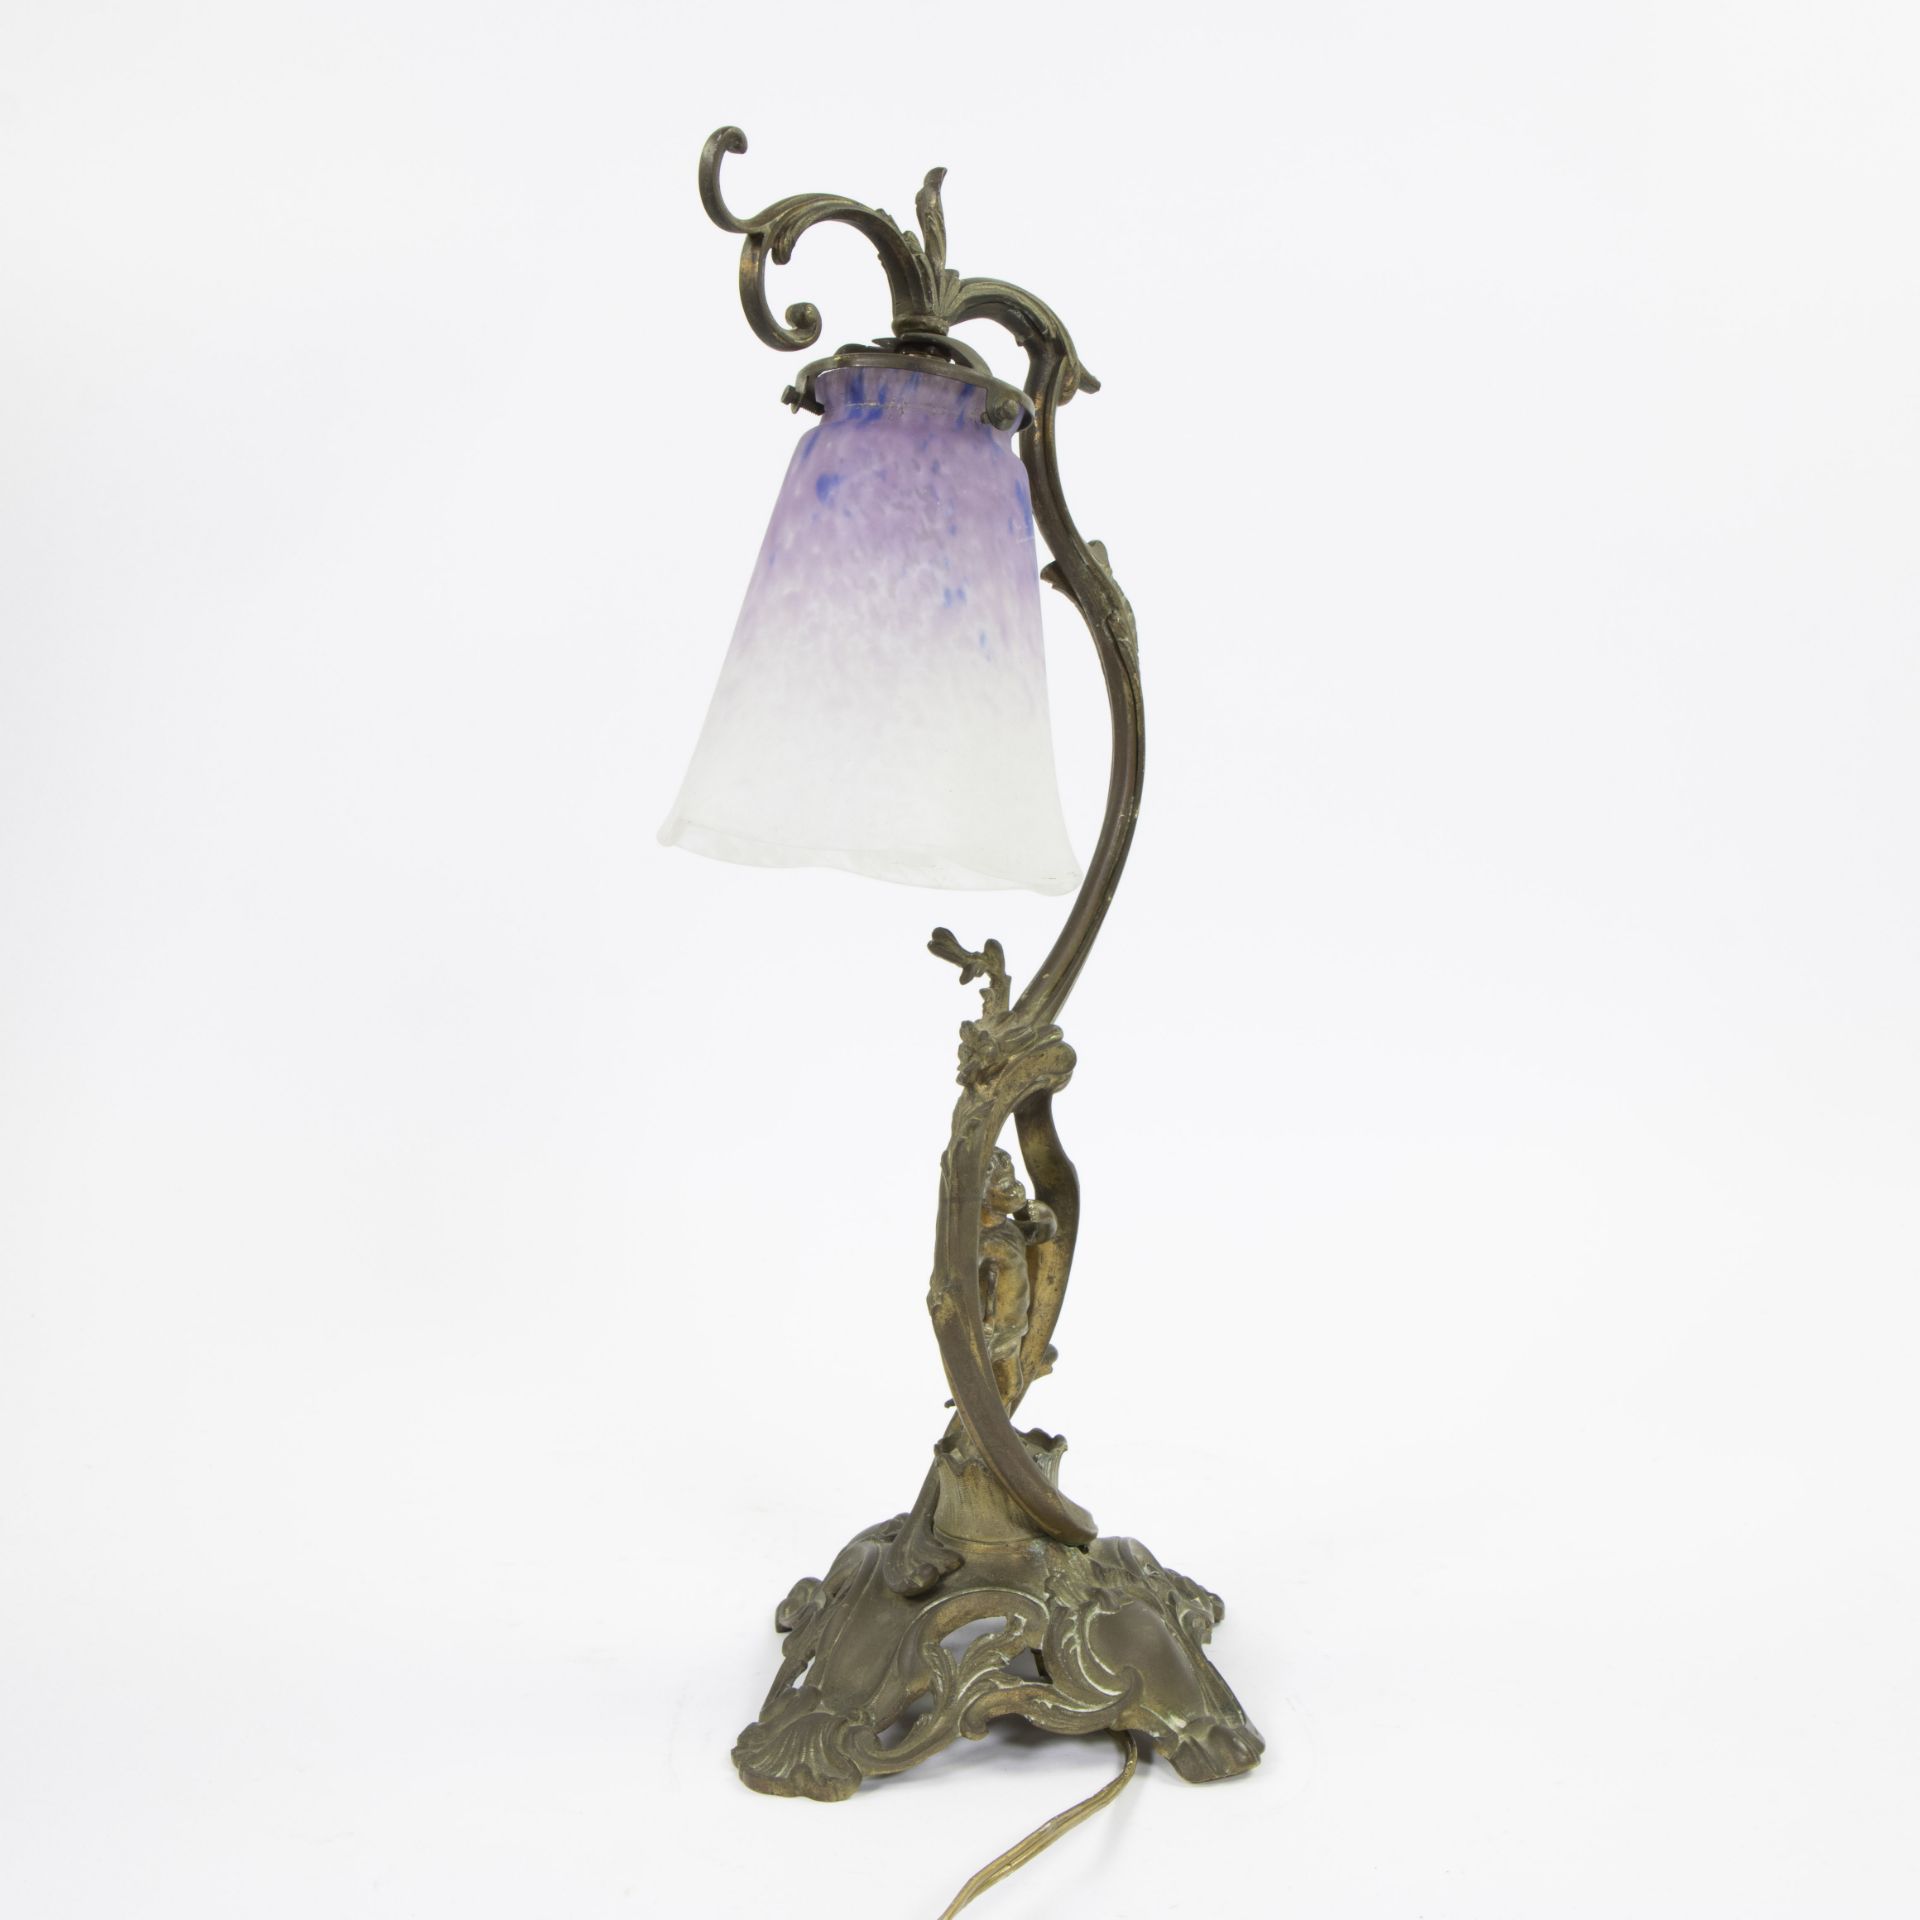 Art Nouveau table lamp in bronze with shade in glass paste Schneider - Image 2 of 4